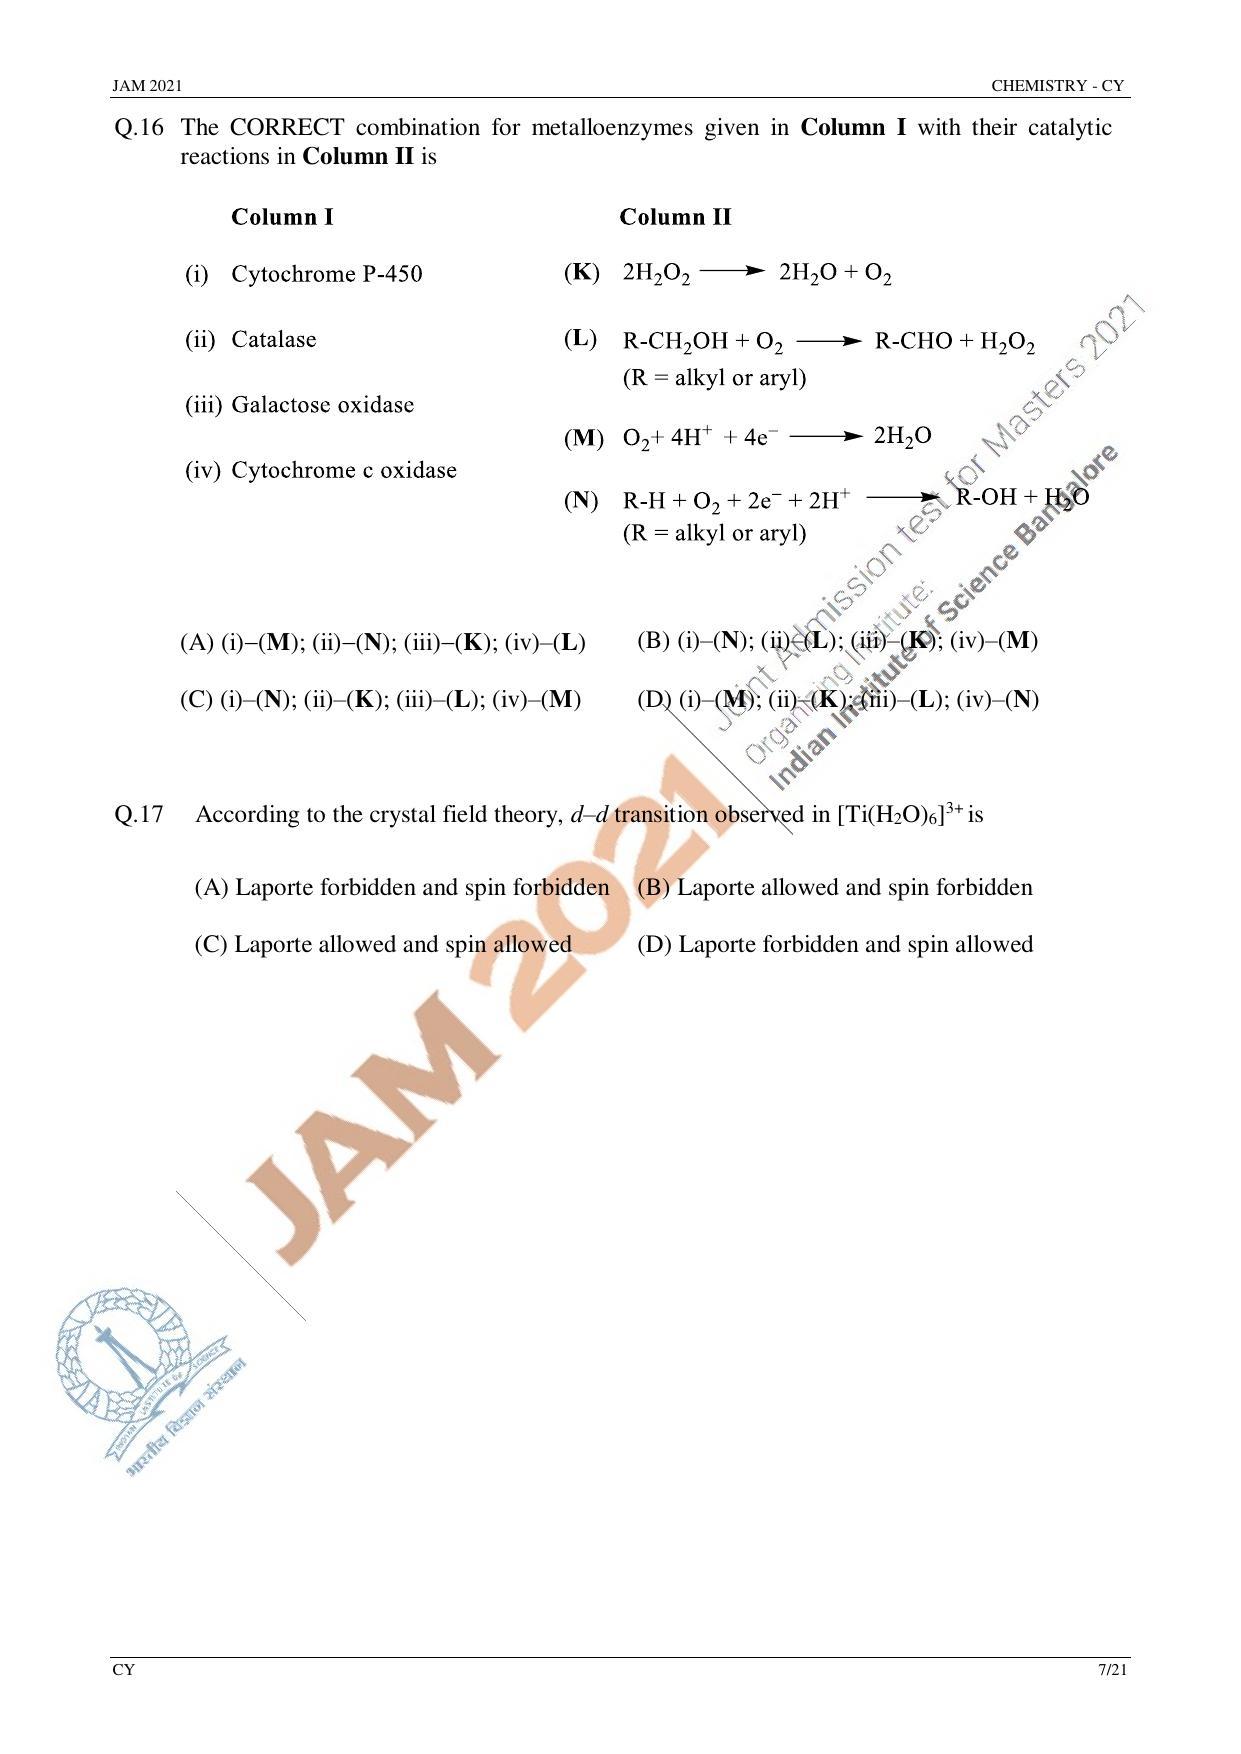 JAM 2021: CY Question Paper - Page 7